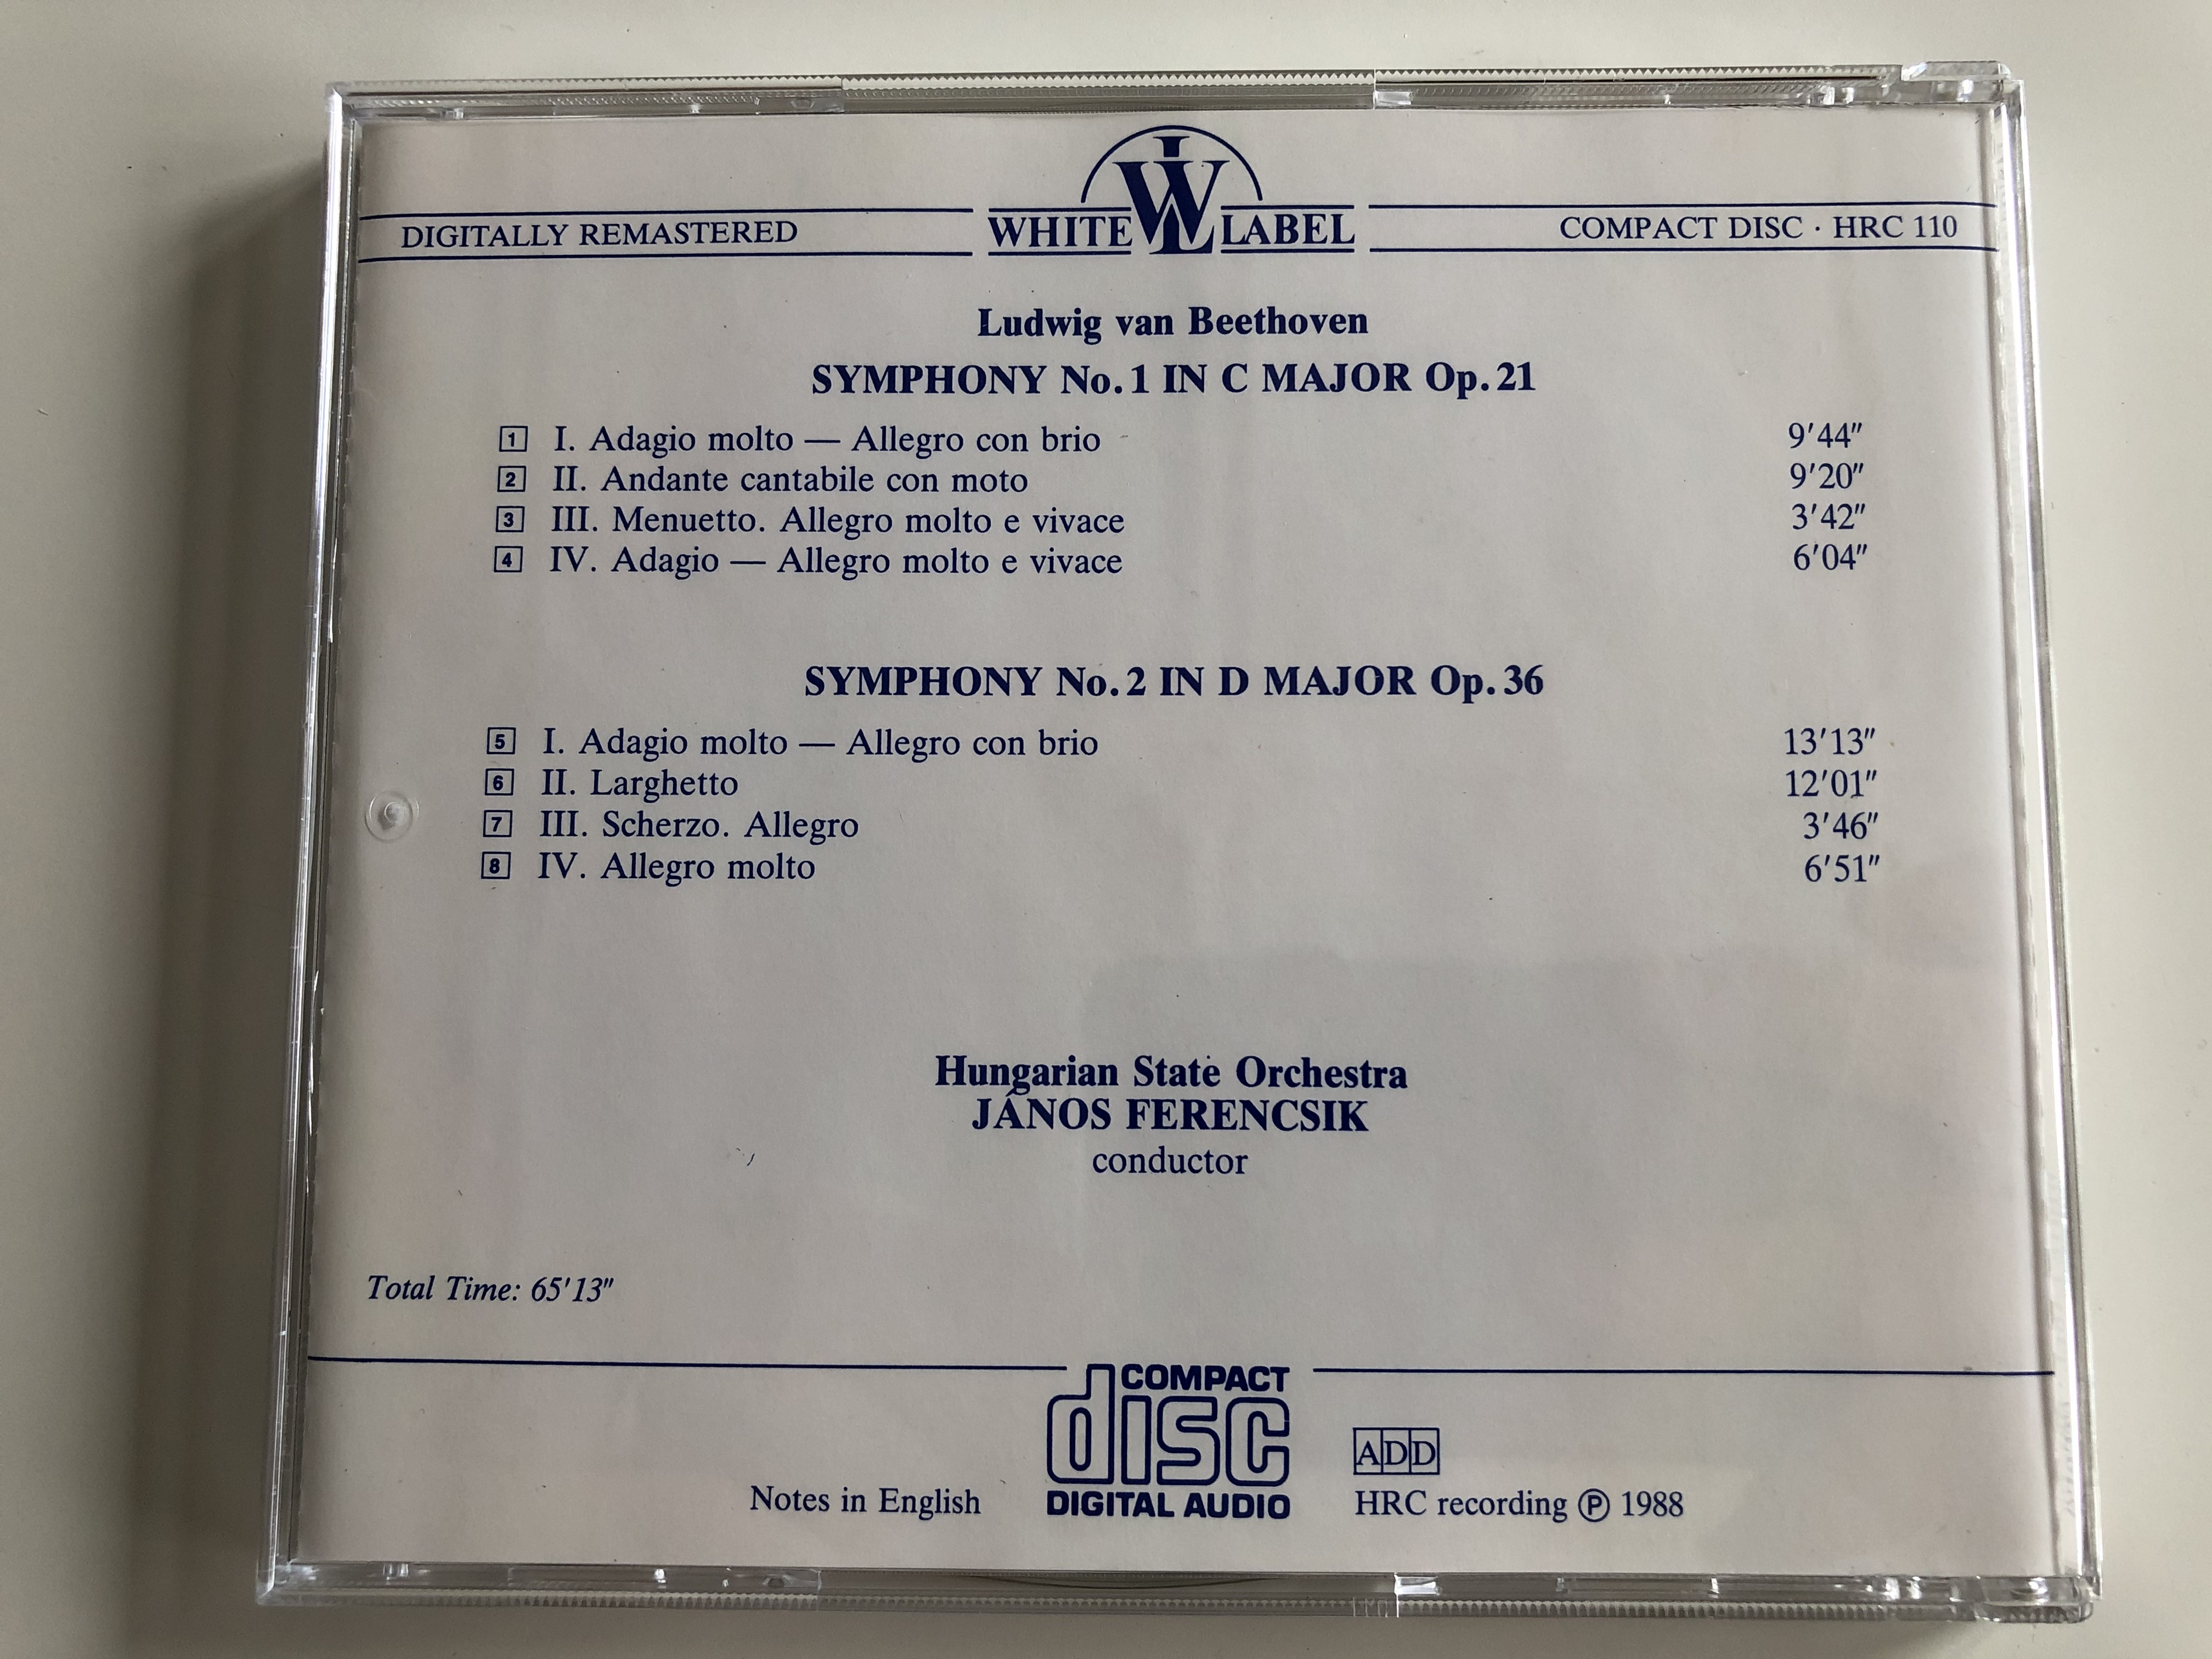 beethoven-symphonies-nos.-1-2-hungarian-state-orchestra-j-nos-ferencsik-hungaroton-audio-cd-1988-stereo-hrc-110-5-.jpg